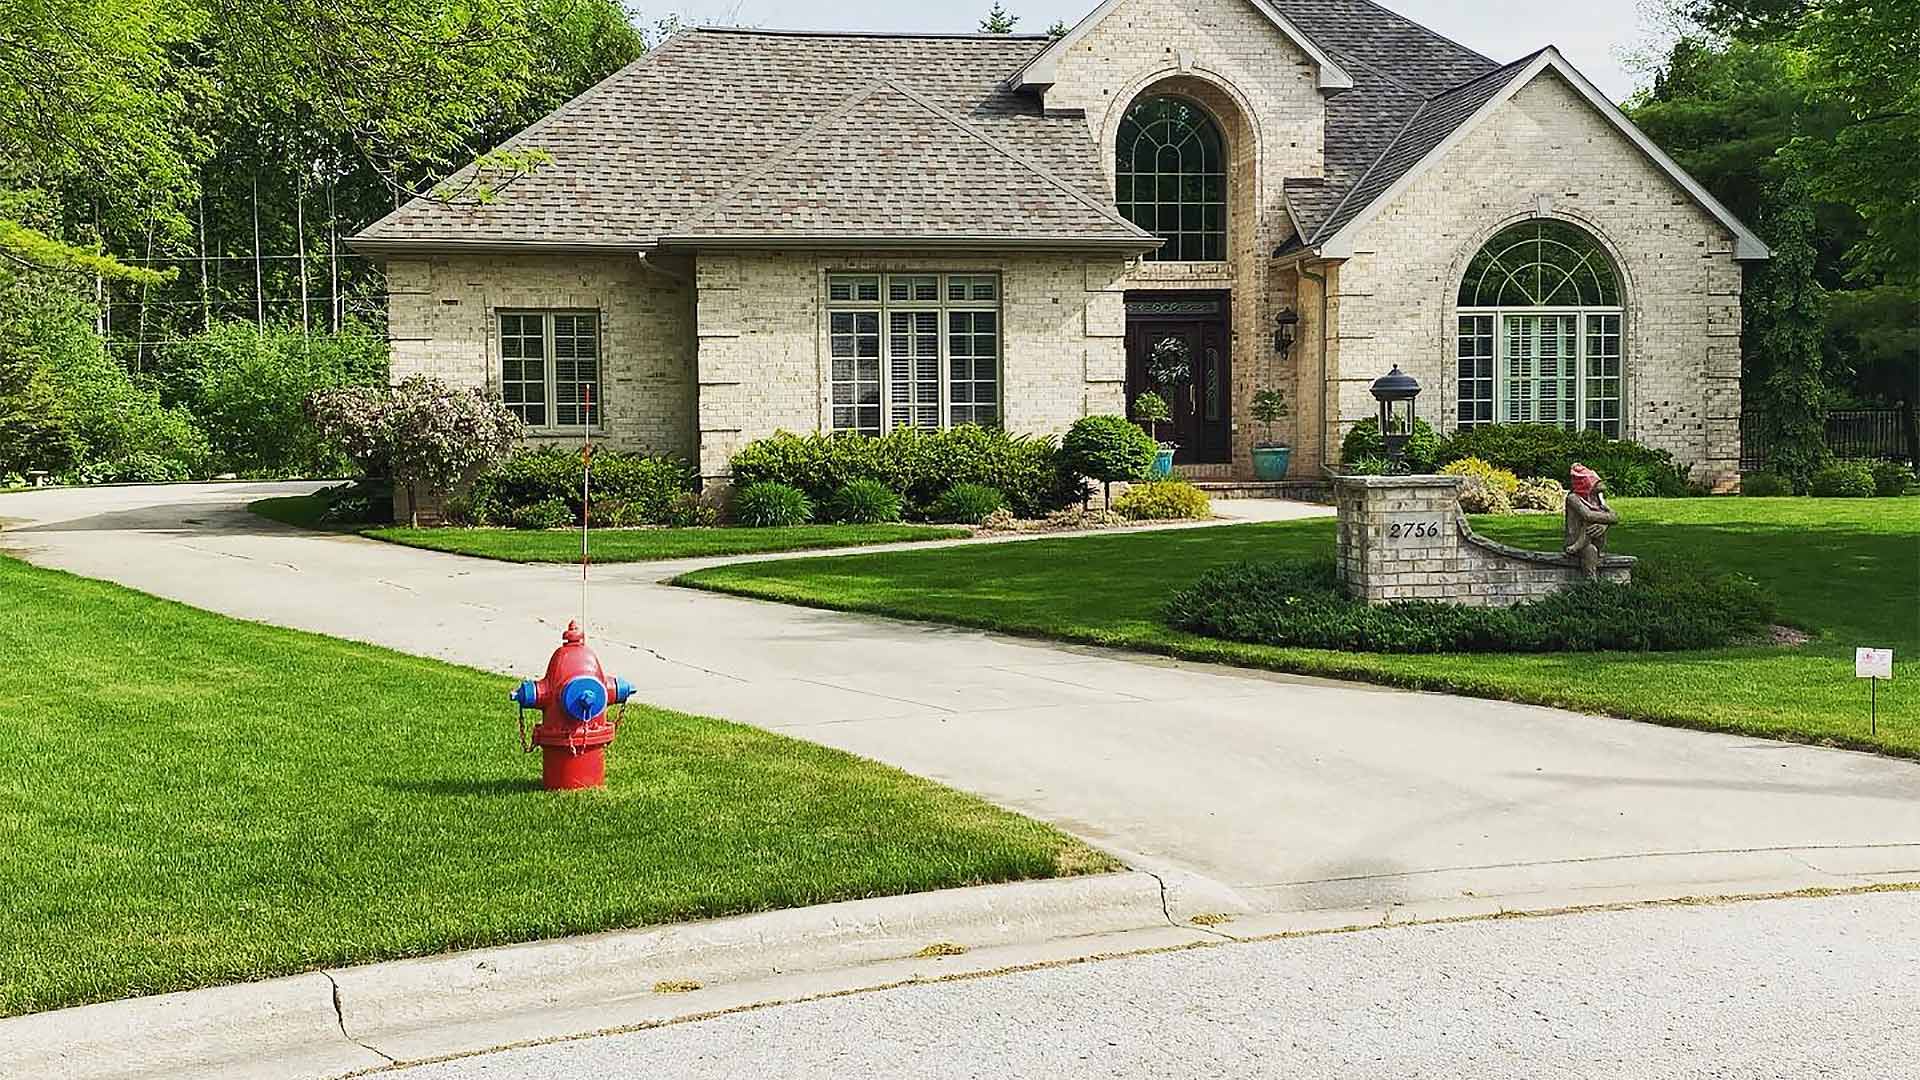 Howard, Wisconsin home with regular lawn care services.